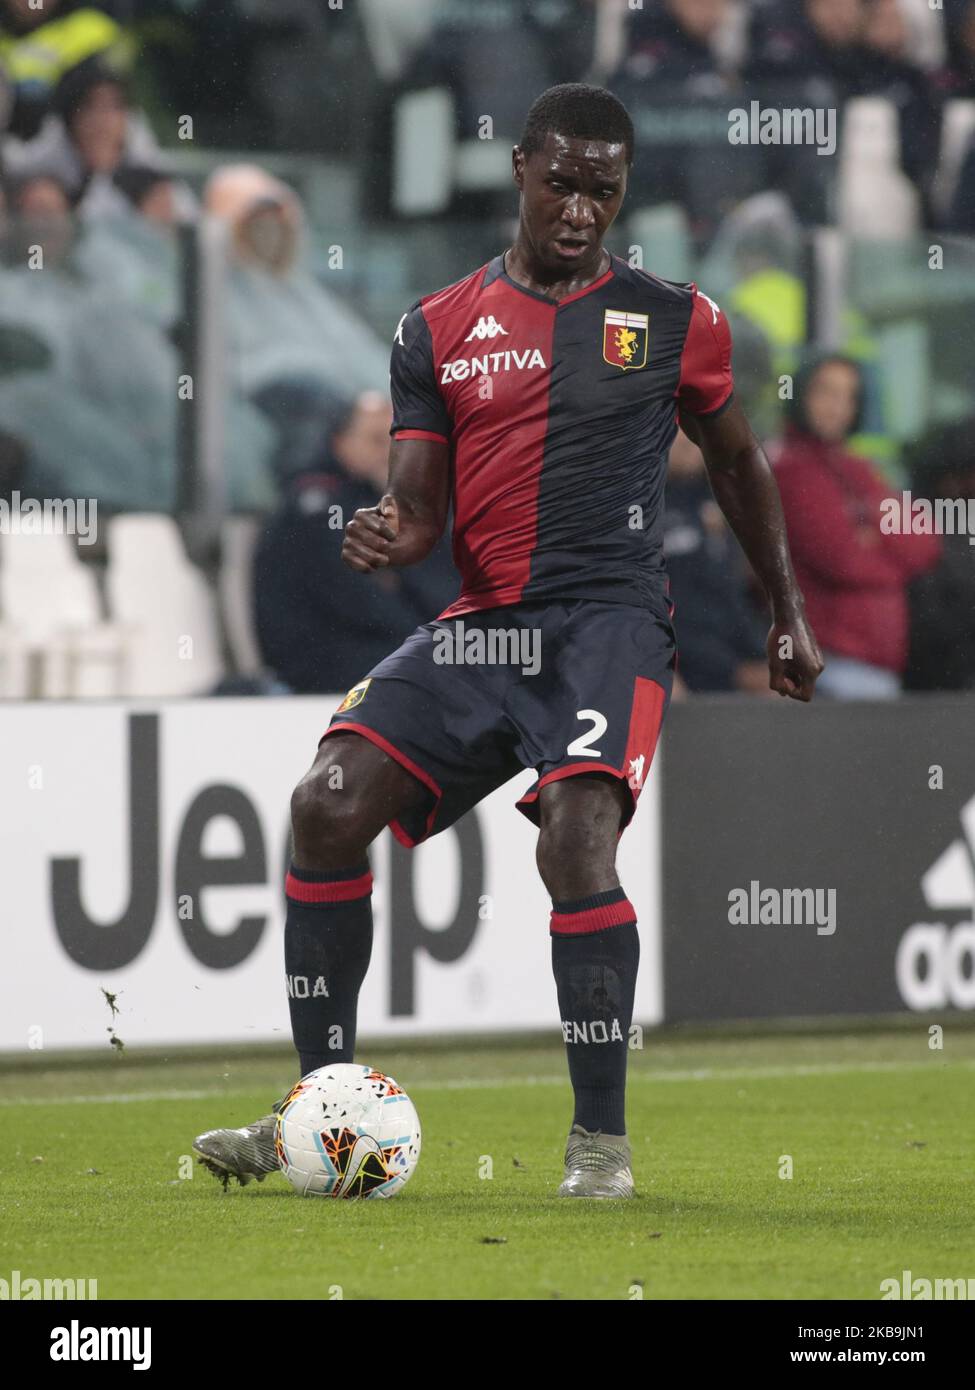 Cristián Zapata during the Serie A football match between Juventus FC and Genoa CFC at Allianz Stadium on October 30, 2019 in Turin, Italy. (Photo by Loris Roselli). Stock Photo